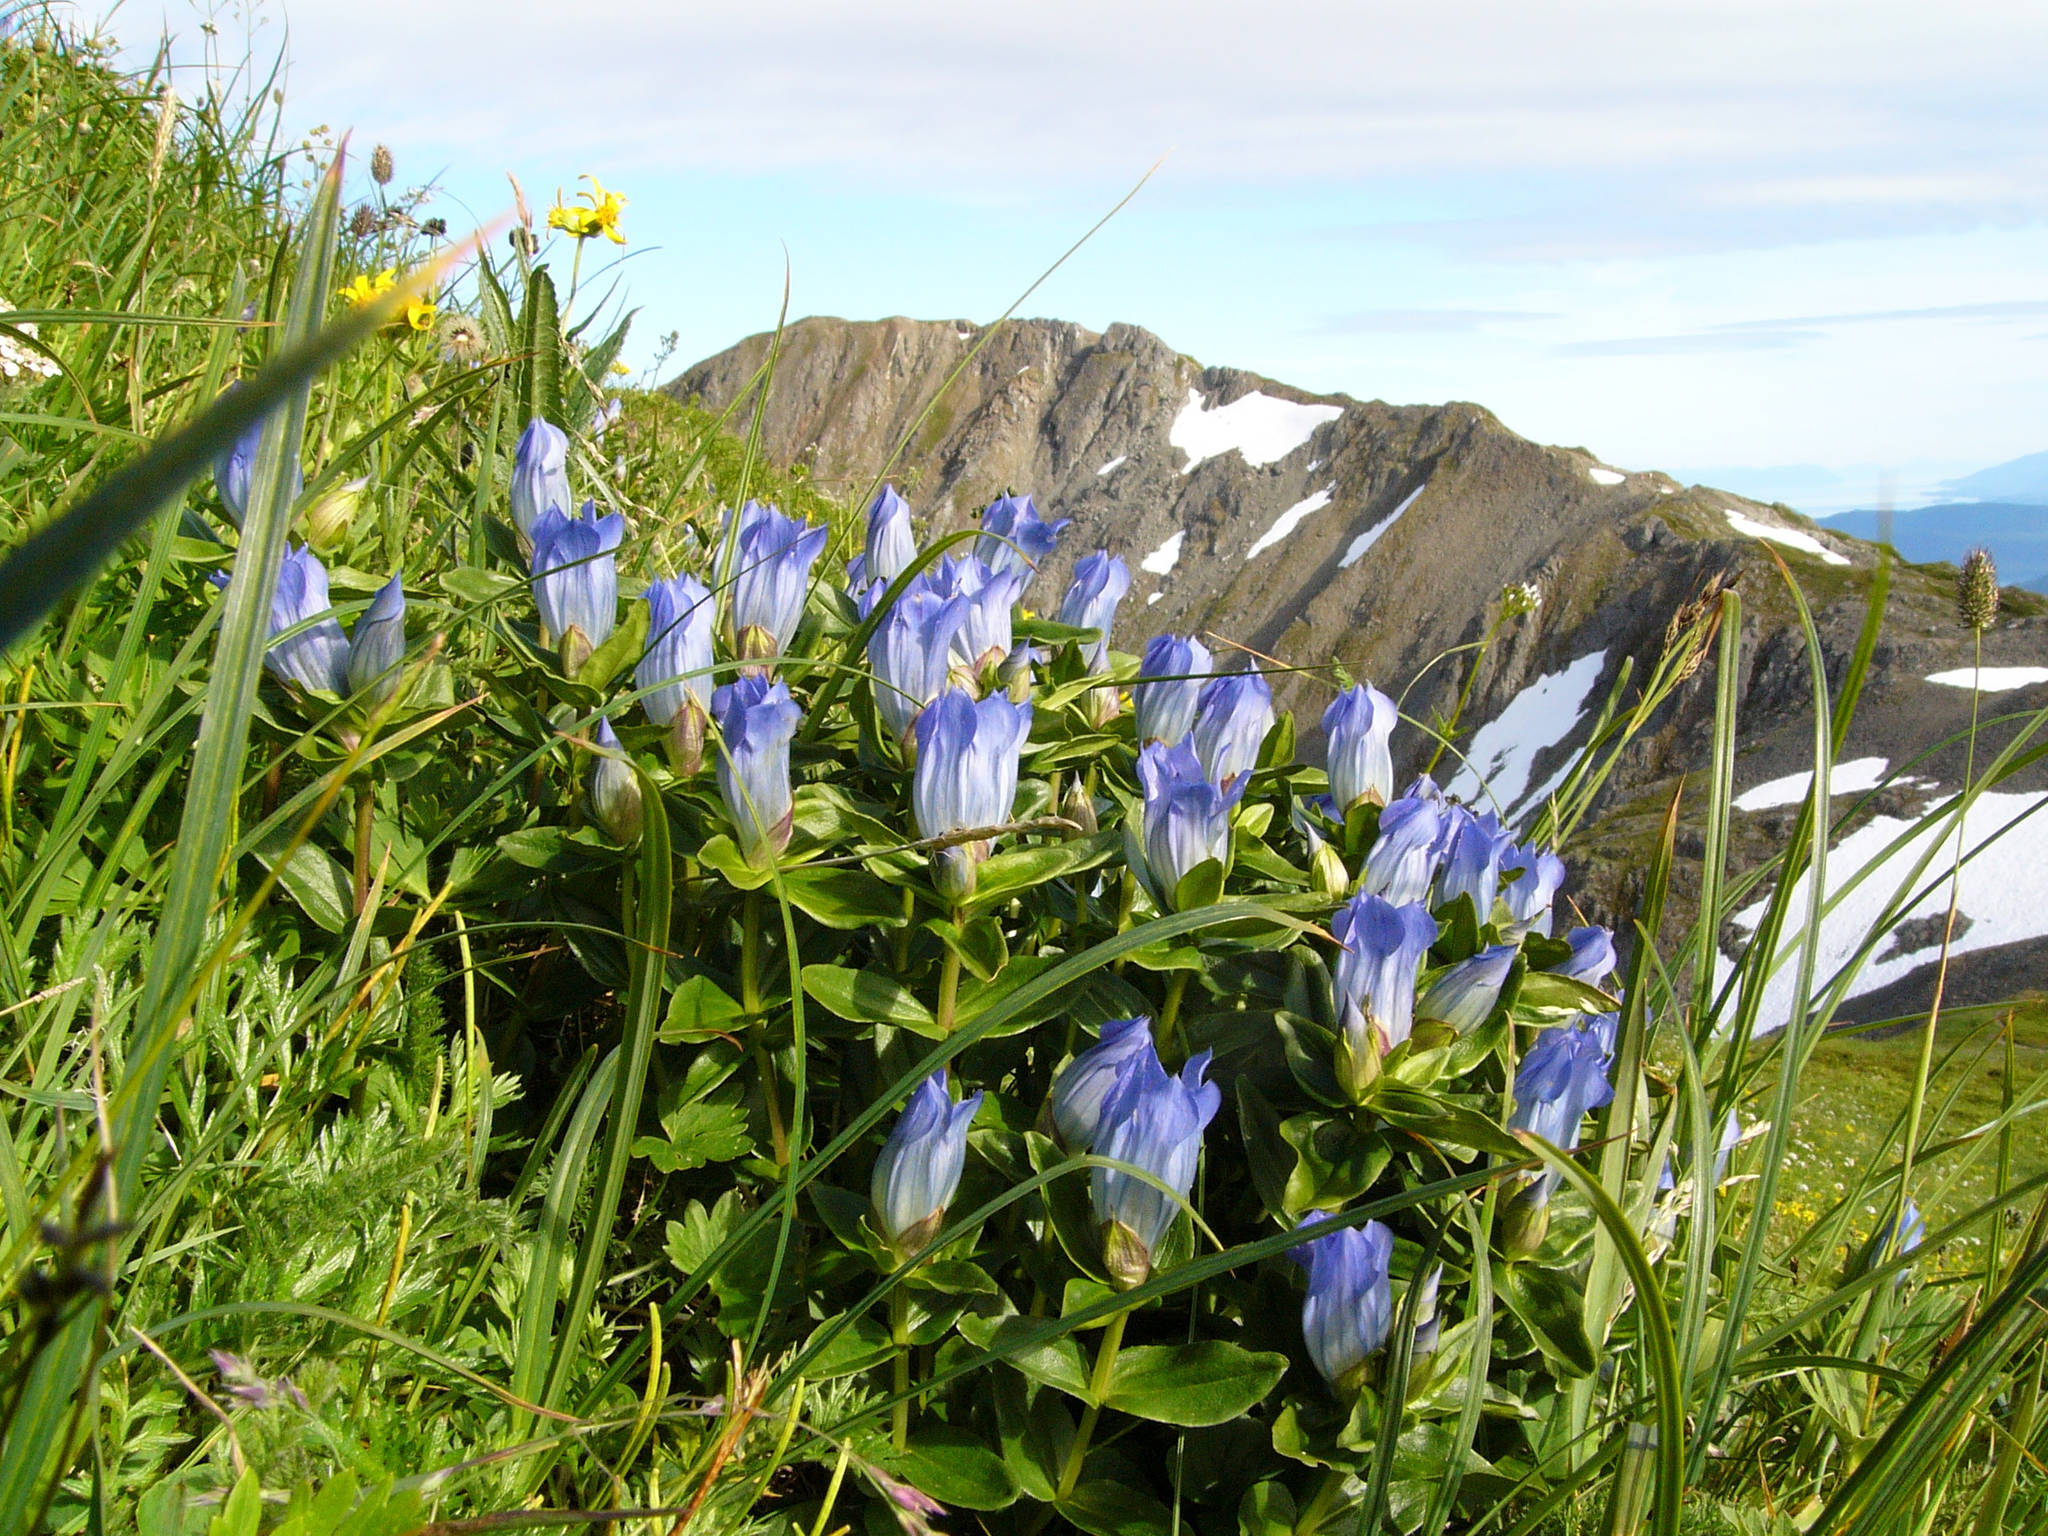 Broad-petalled gentians bloom late in the summer, a visual treat in the alpine. Photo by Bob Armstrong.